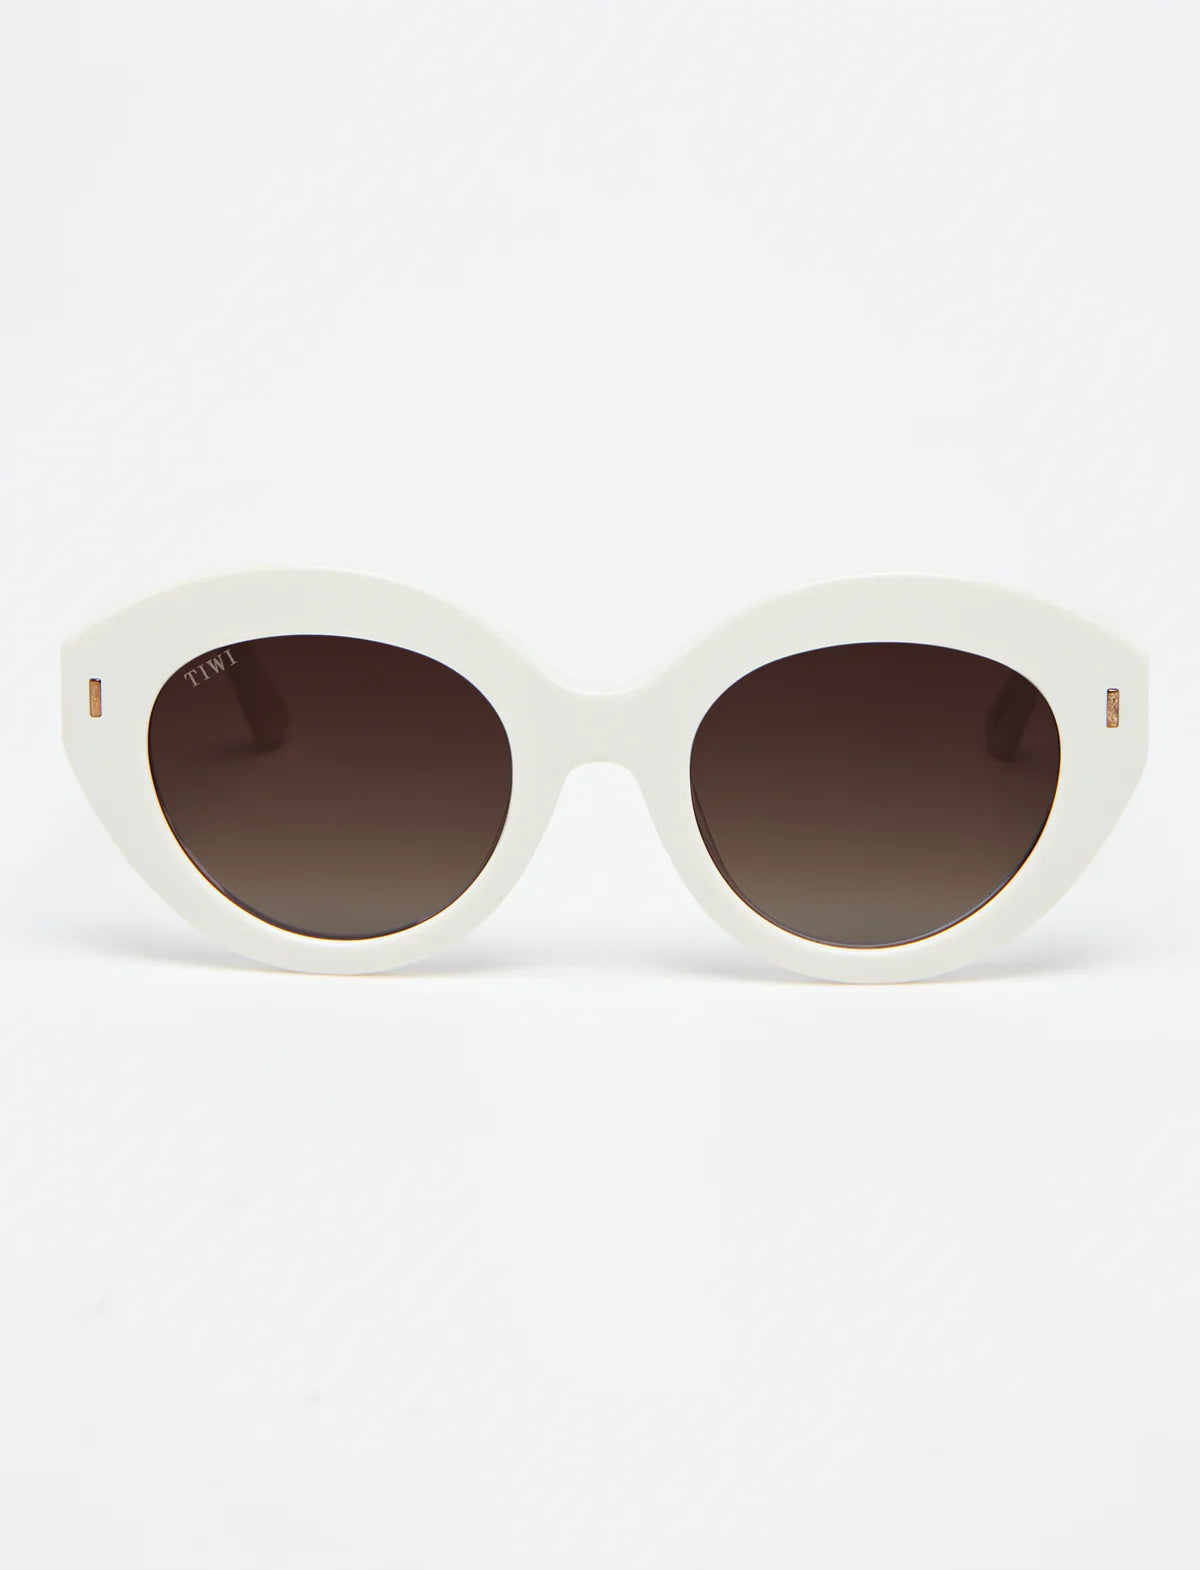 Limited Edition - Collection 1/300 Sunglasses TIWI USA Anne White Limited Edition 1/300  